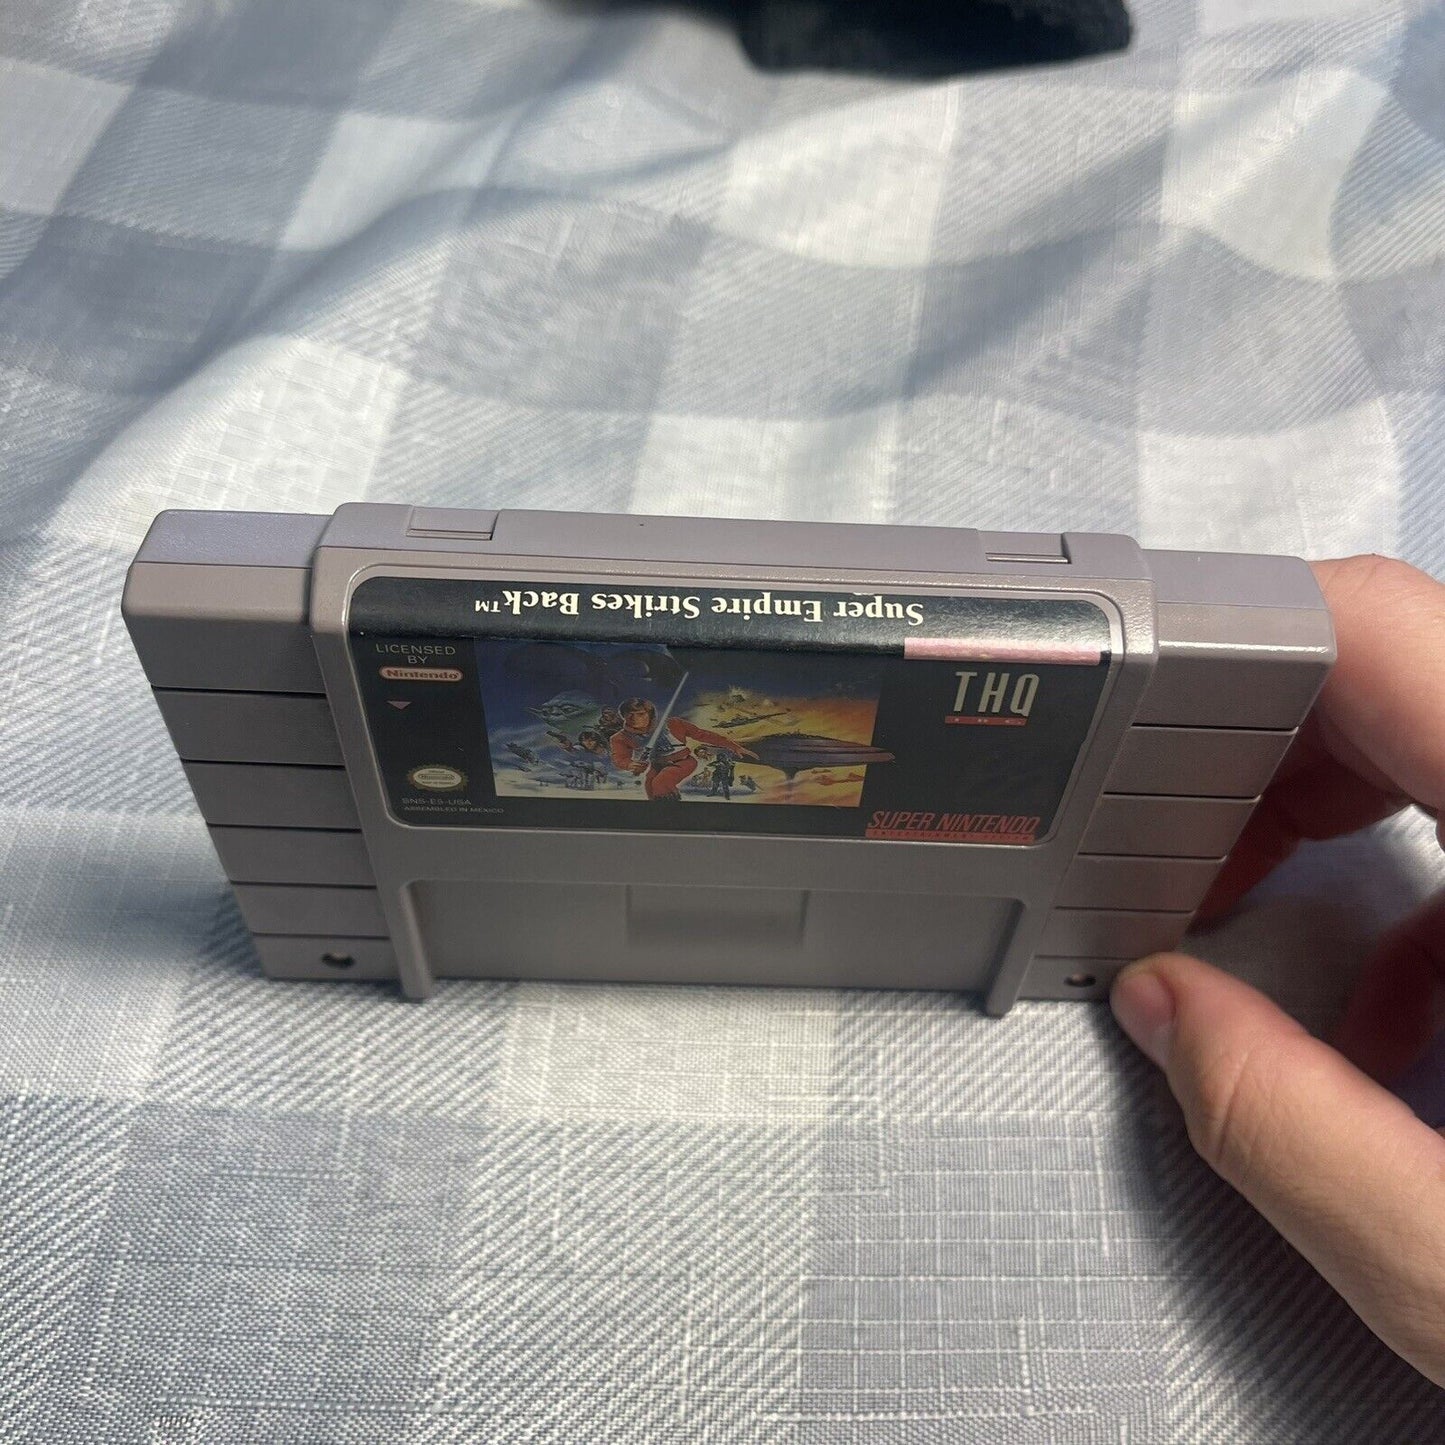 Nintendo Super The Empire Strikes Back - Cart Only, Tested!